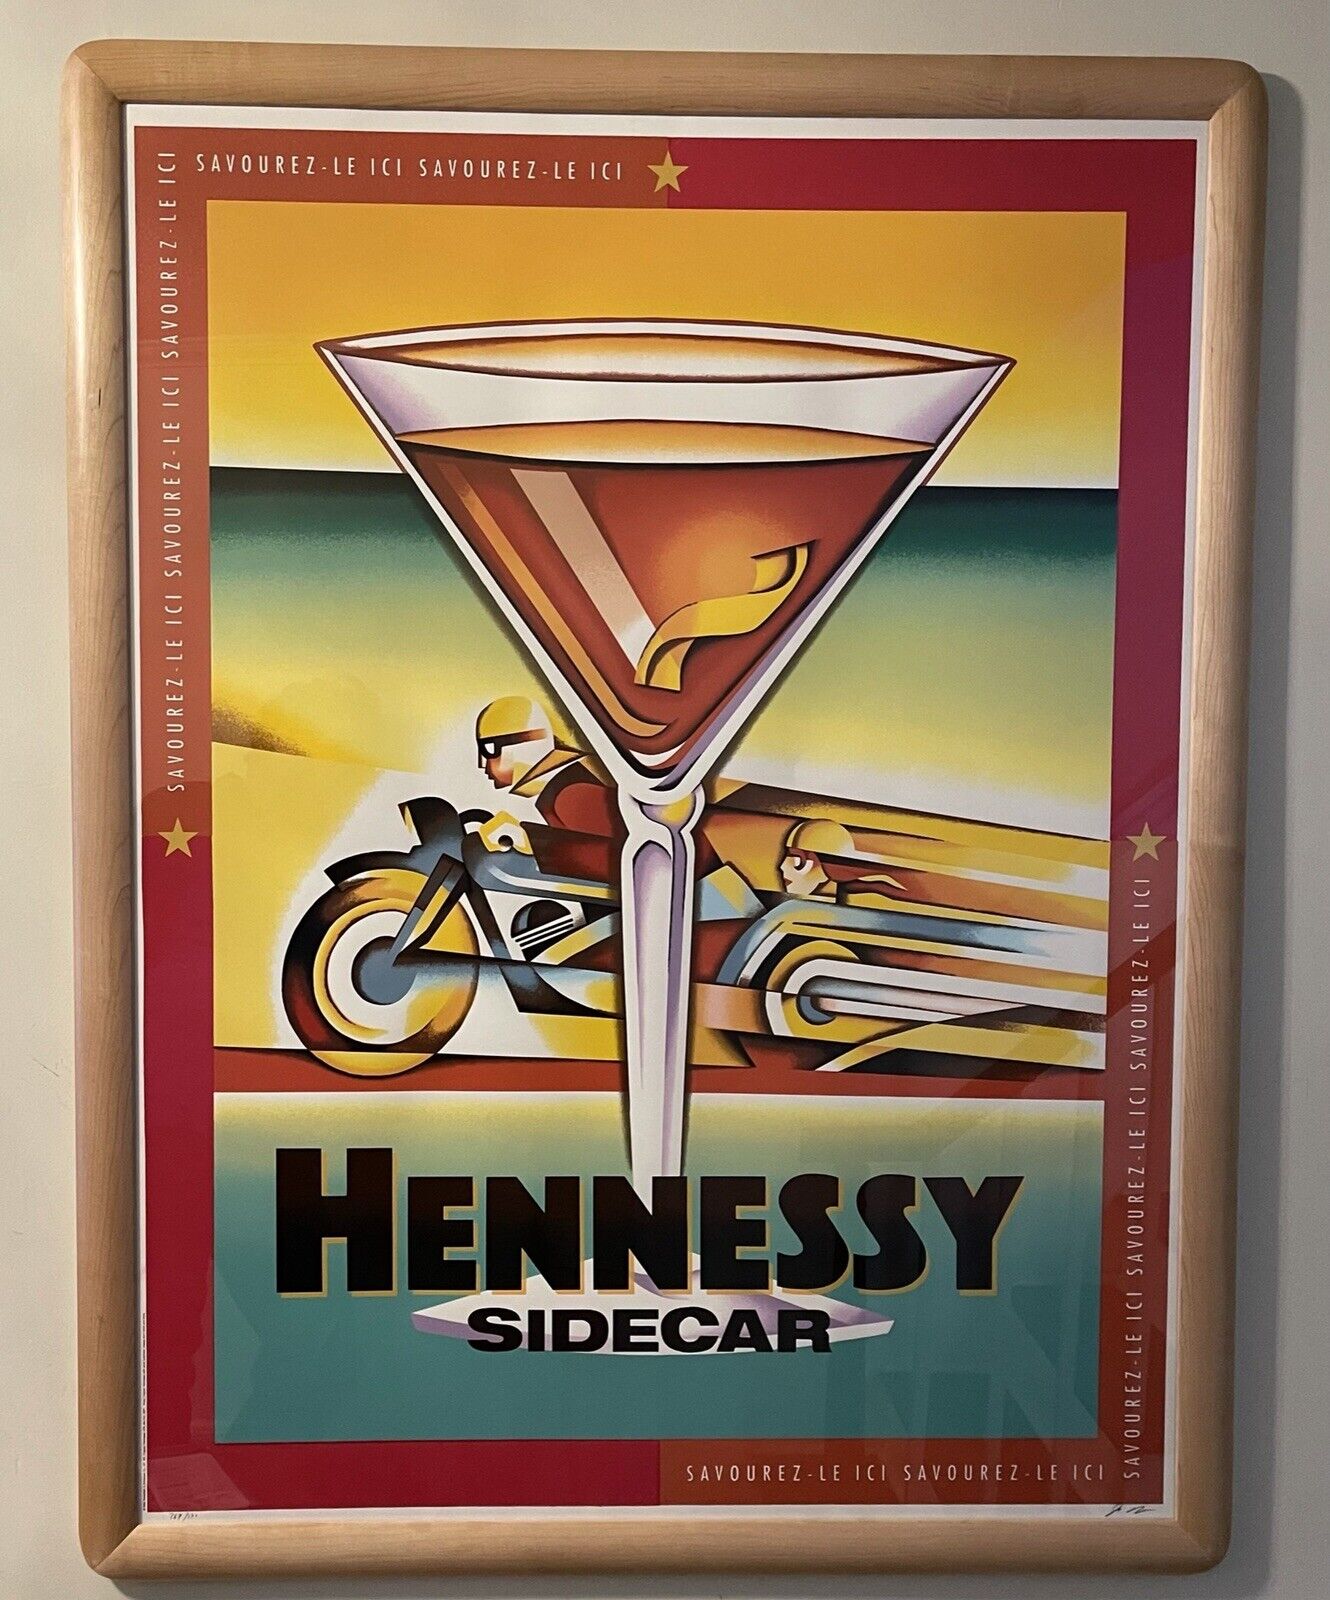 Hennessy Sidecar Vintage 1998 Advertising Poster,36x48